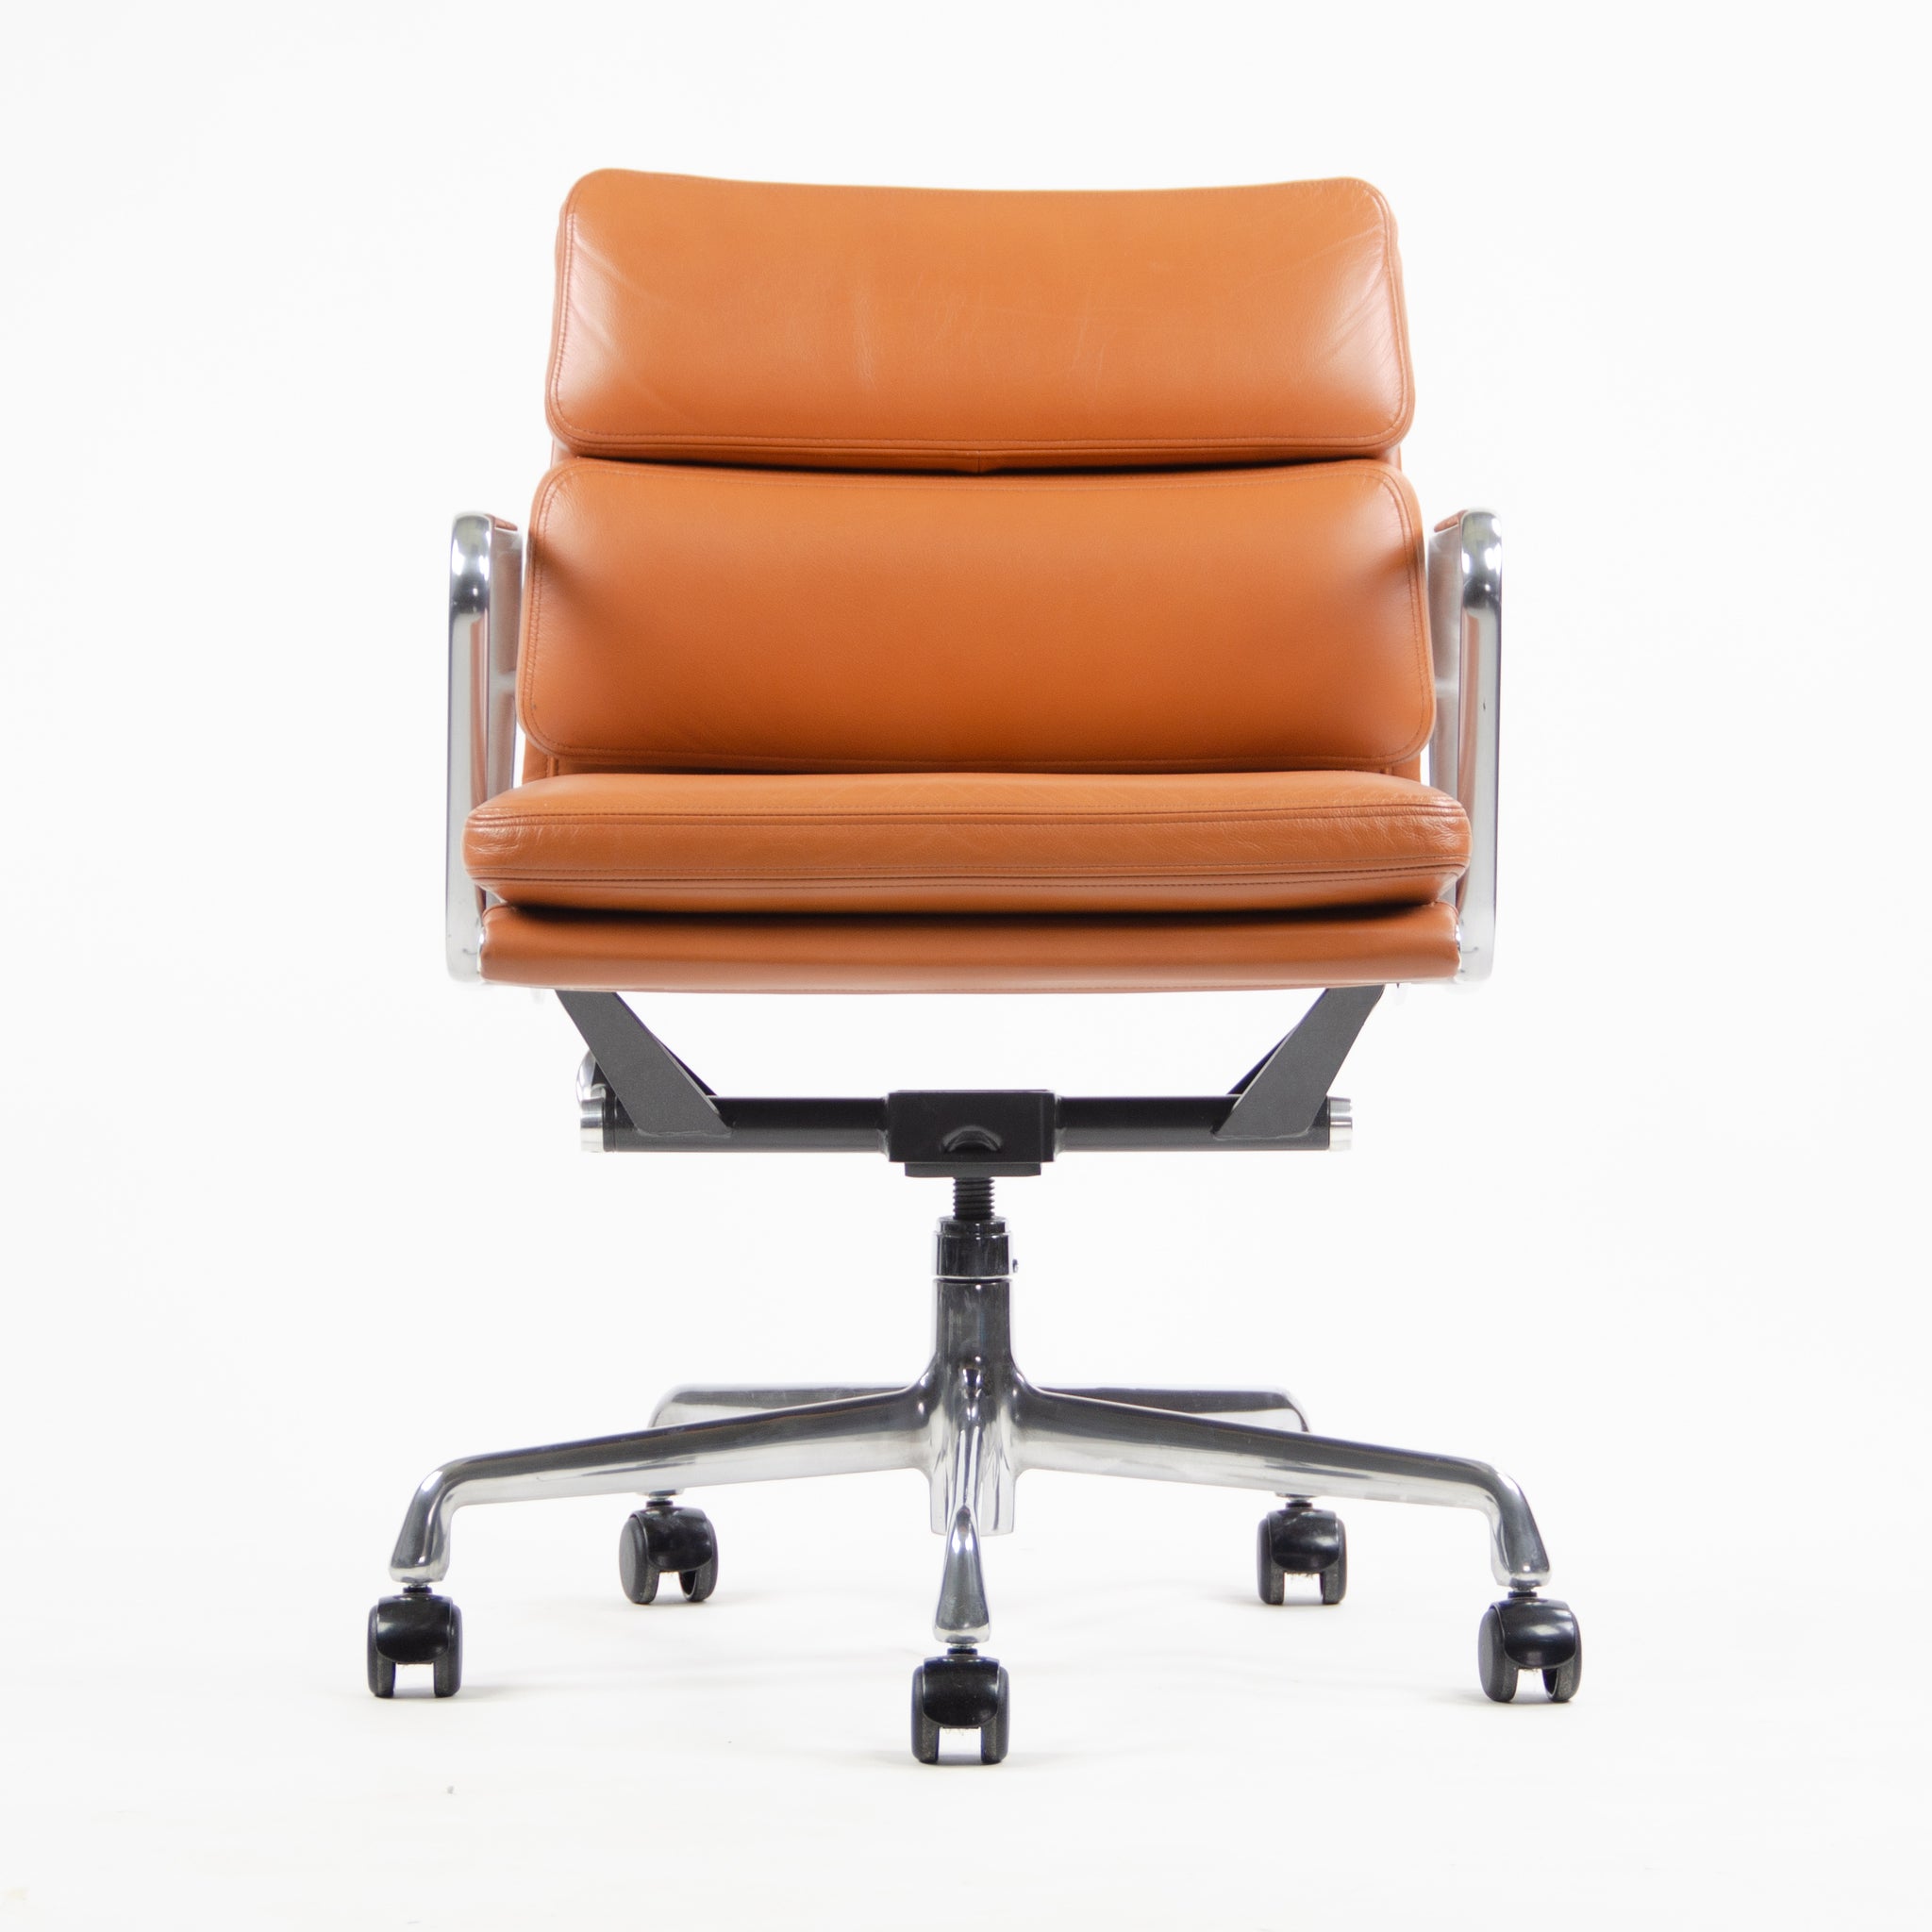 SOLD Brand New 2017 Eames Herman Miller Low Soft Pad Aluminum Desk Chair Cognac Leather